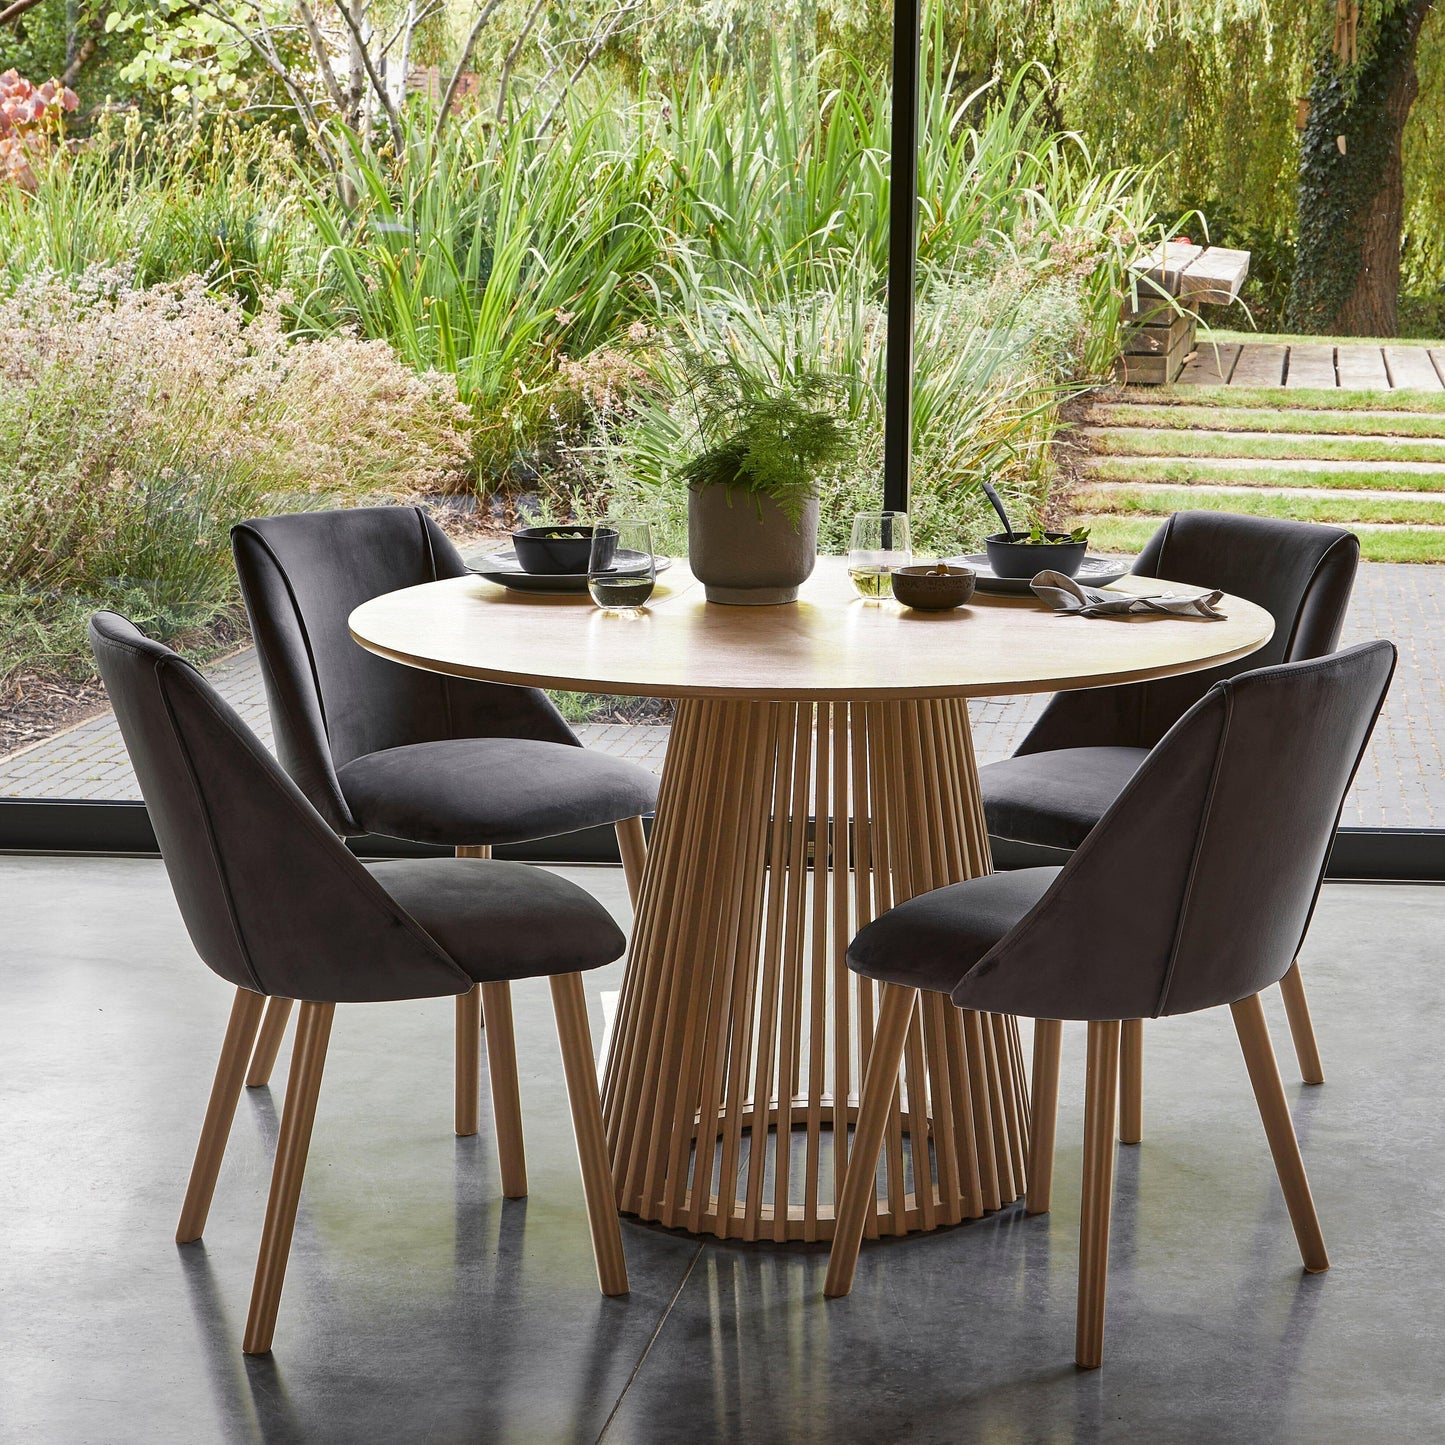  Willow 4 Seater Pale Oak Dining Table Set - Freya Grey Dining Chairs with Pale Oak Legs - Laura James